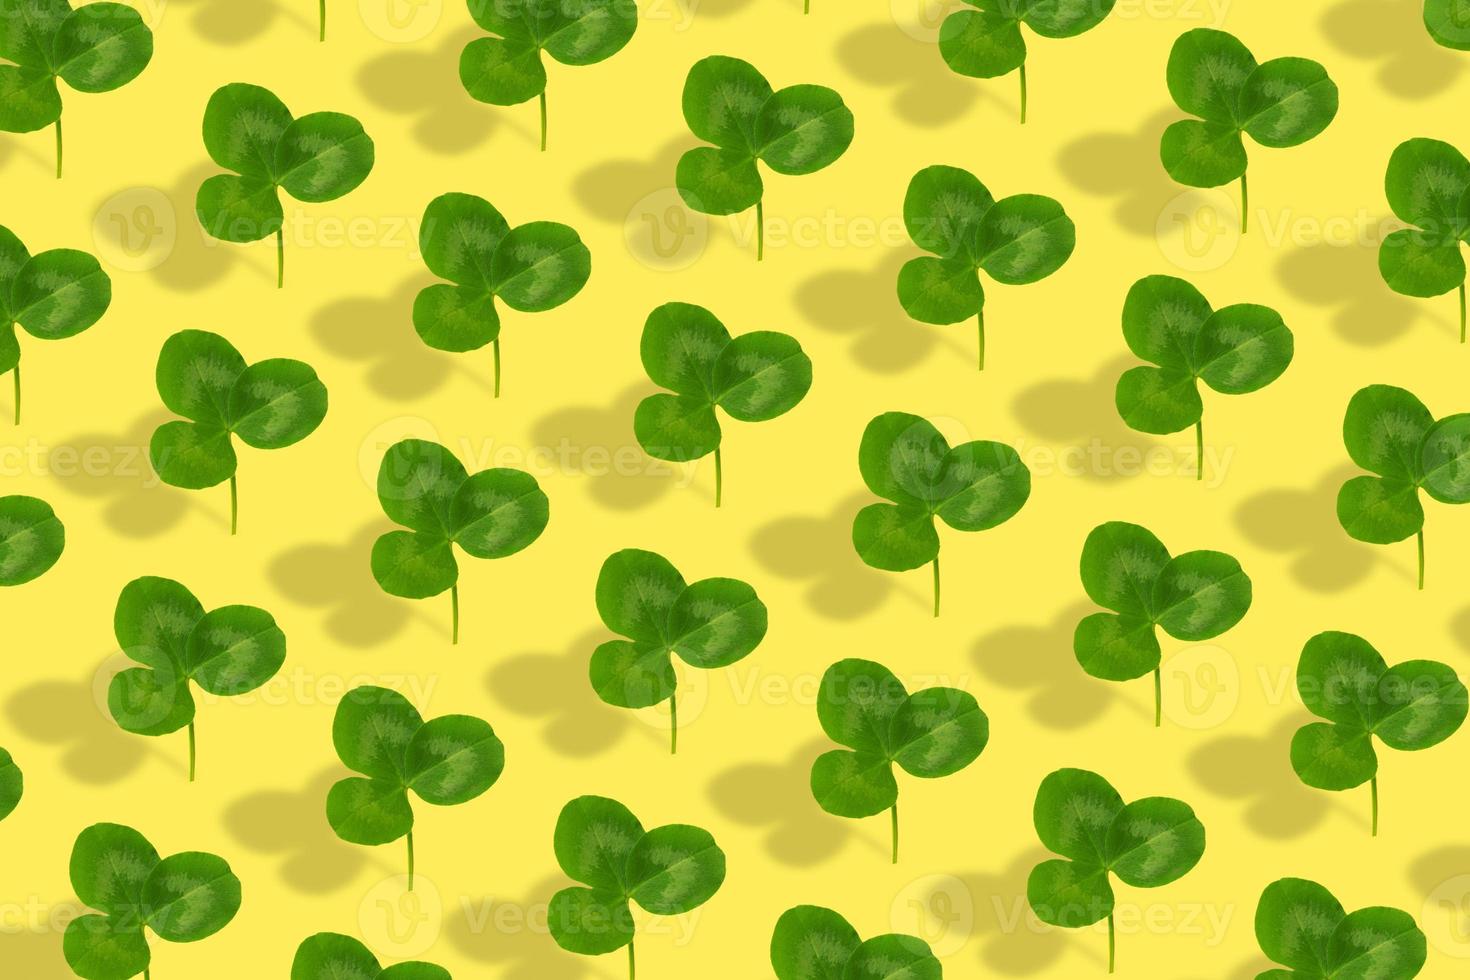 Clover leaf pattern on colored background. Abstract background for St. Patrick's Day photo